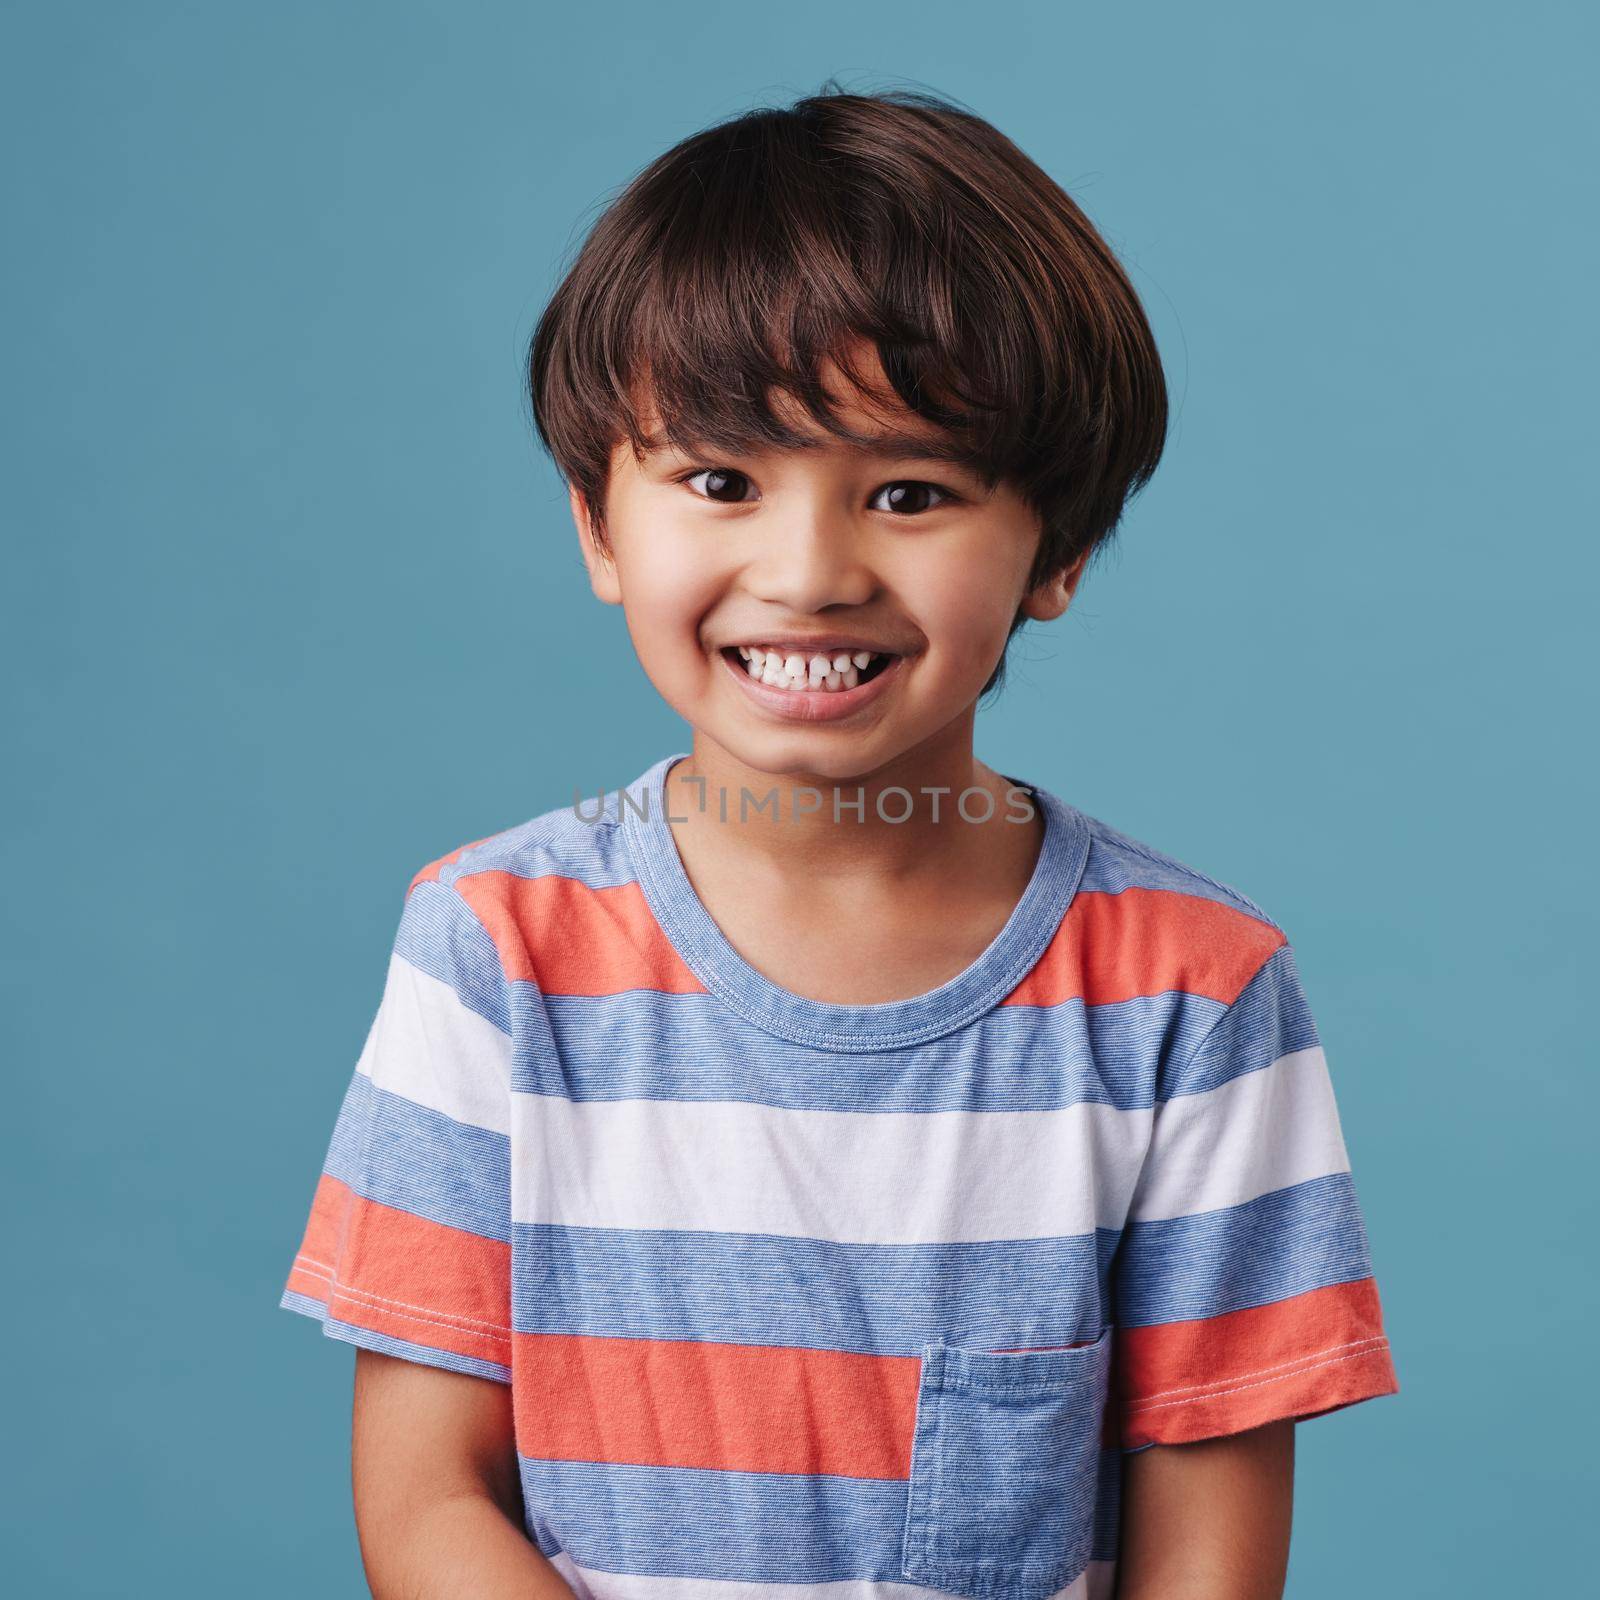 Portrait of a cute little asian boy wearing casual clothes while smiling and looking excited. Child standing against a blue studio background. Adorable happy little boy safe and alone.